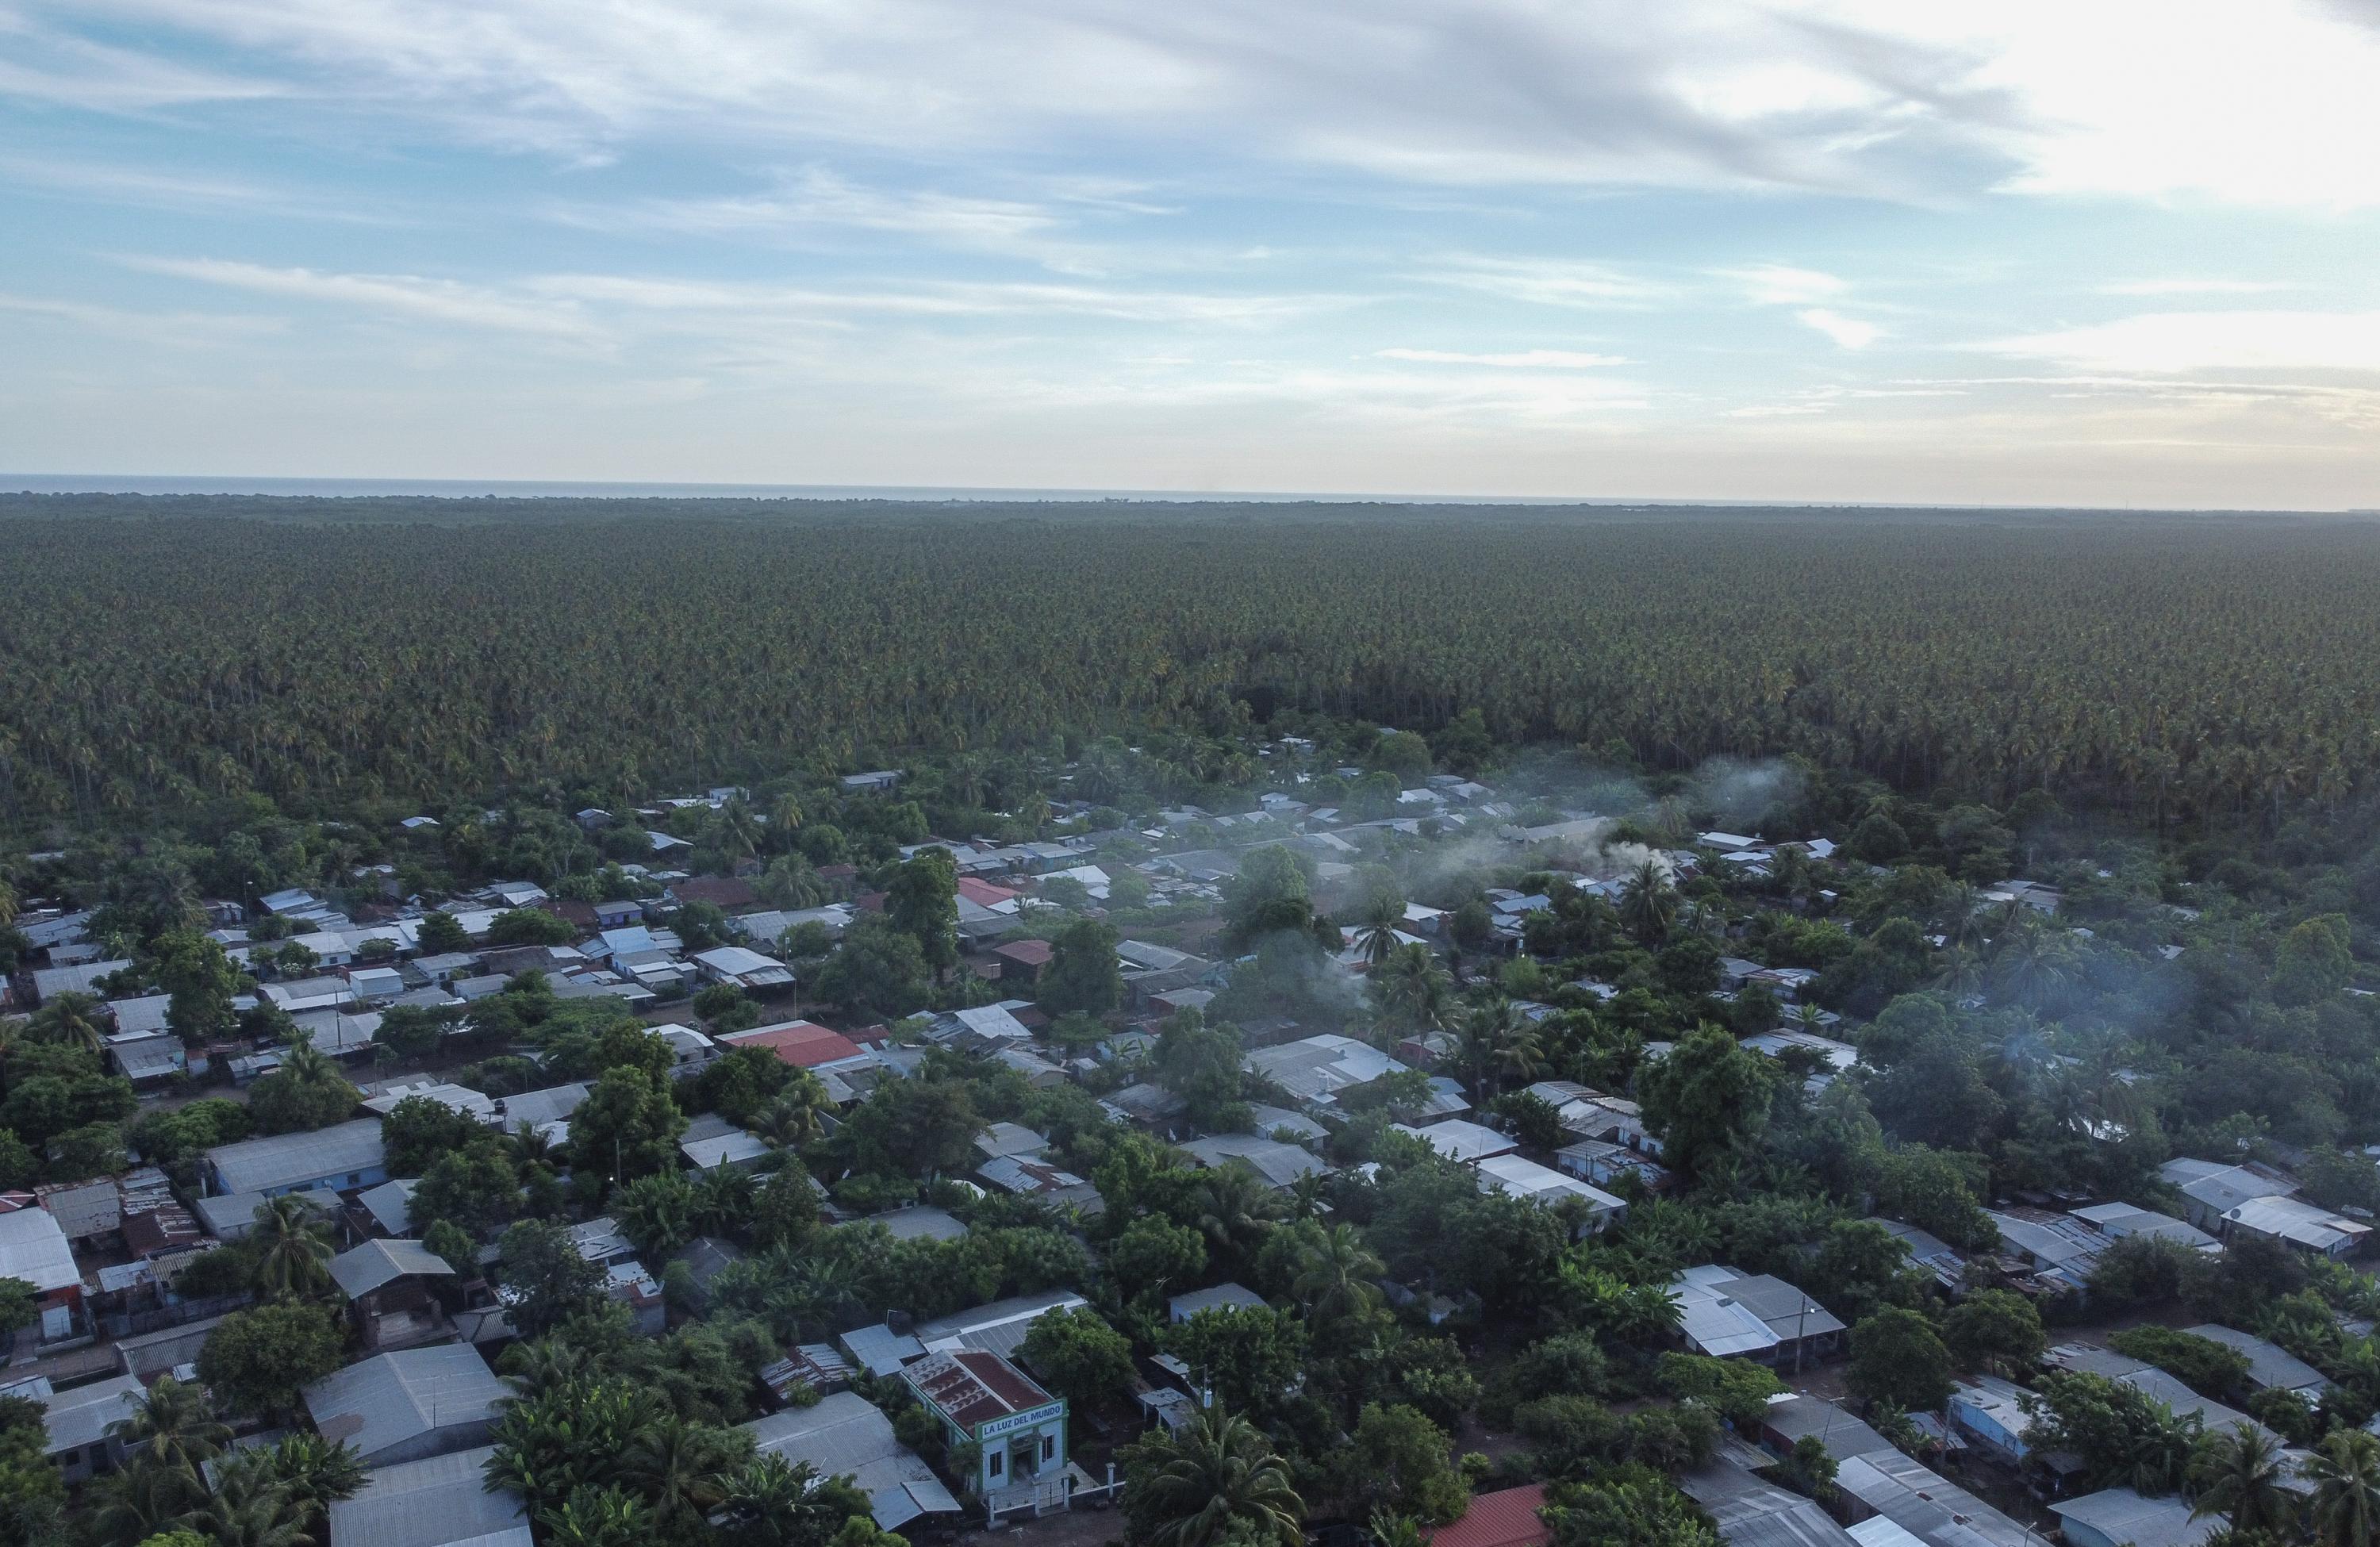 The community of El Jobal is located on Espíritu Santo Island in Jiquilisco Bay, Usulután. According to local leaders, there are approximately 1,400 people living in the community, which is home to a coconut by-product production cooperative. Photo Carlos Barrera